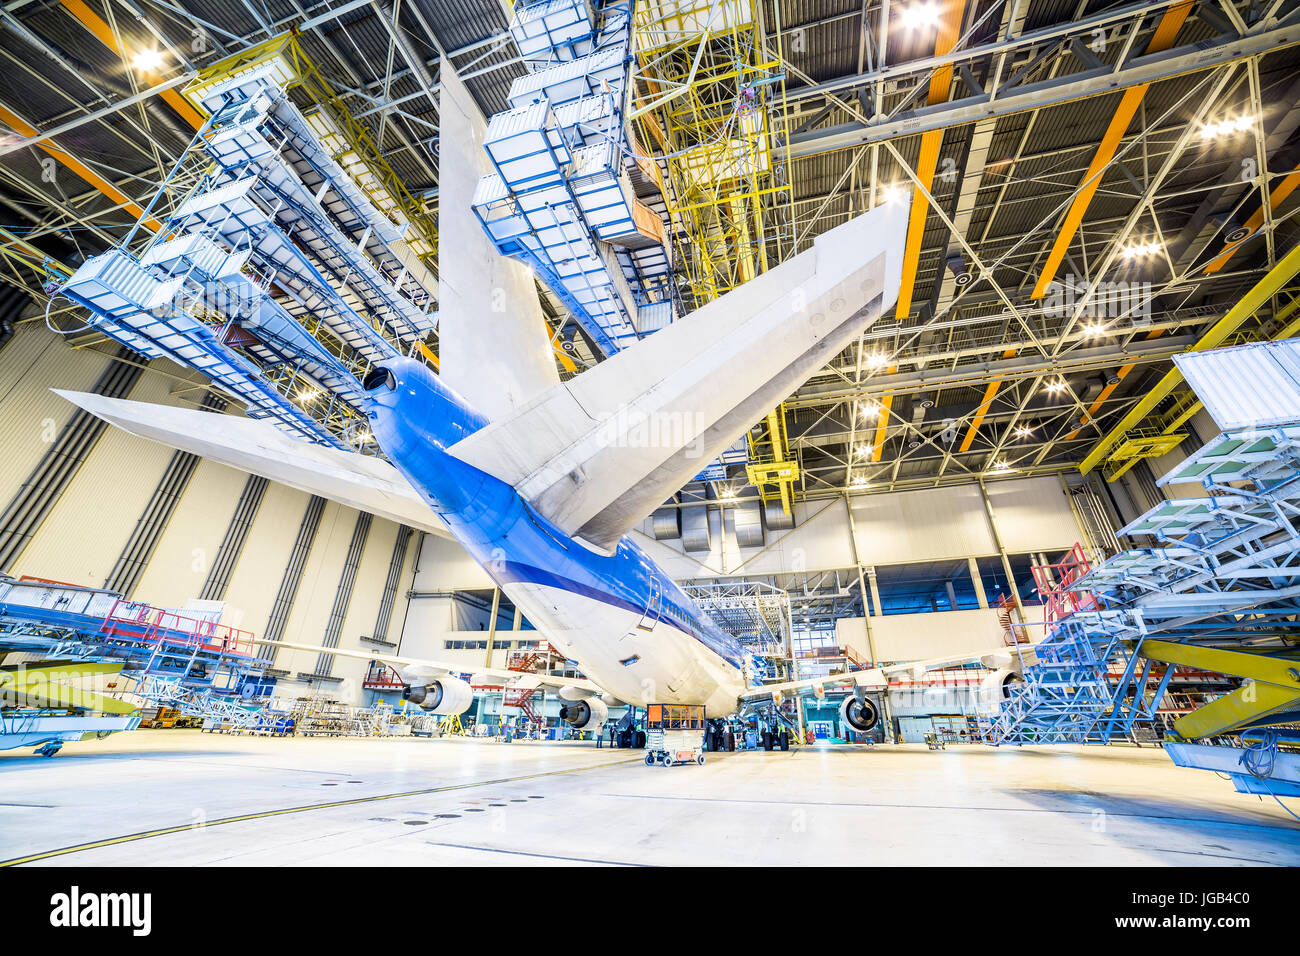 Refurbishment of white and blue airplane in a hangar. Stock Photo